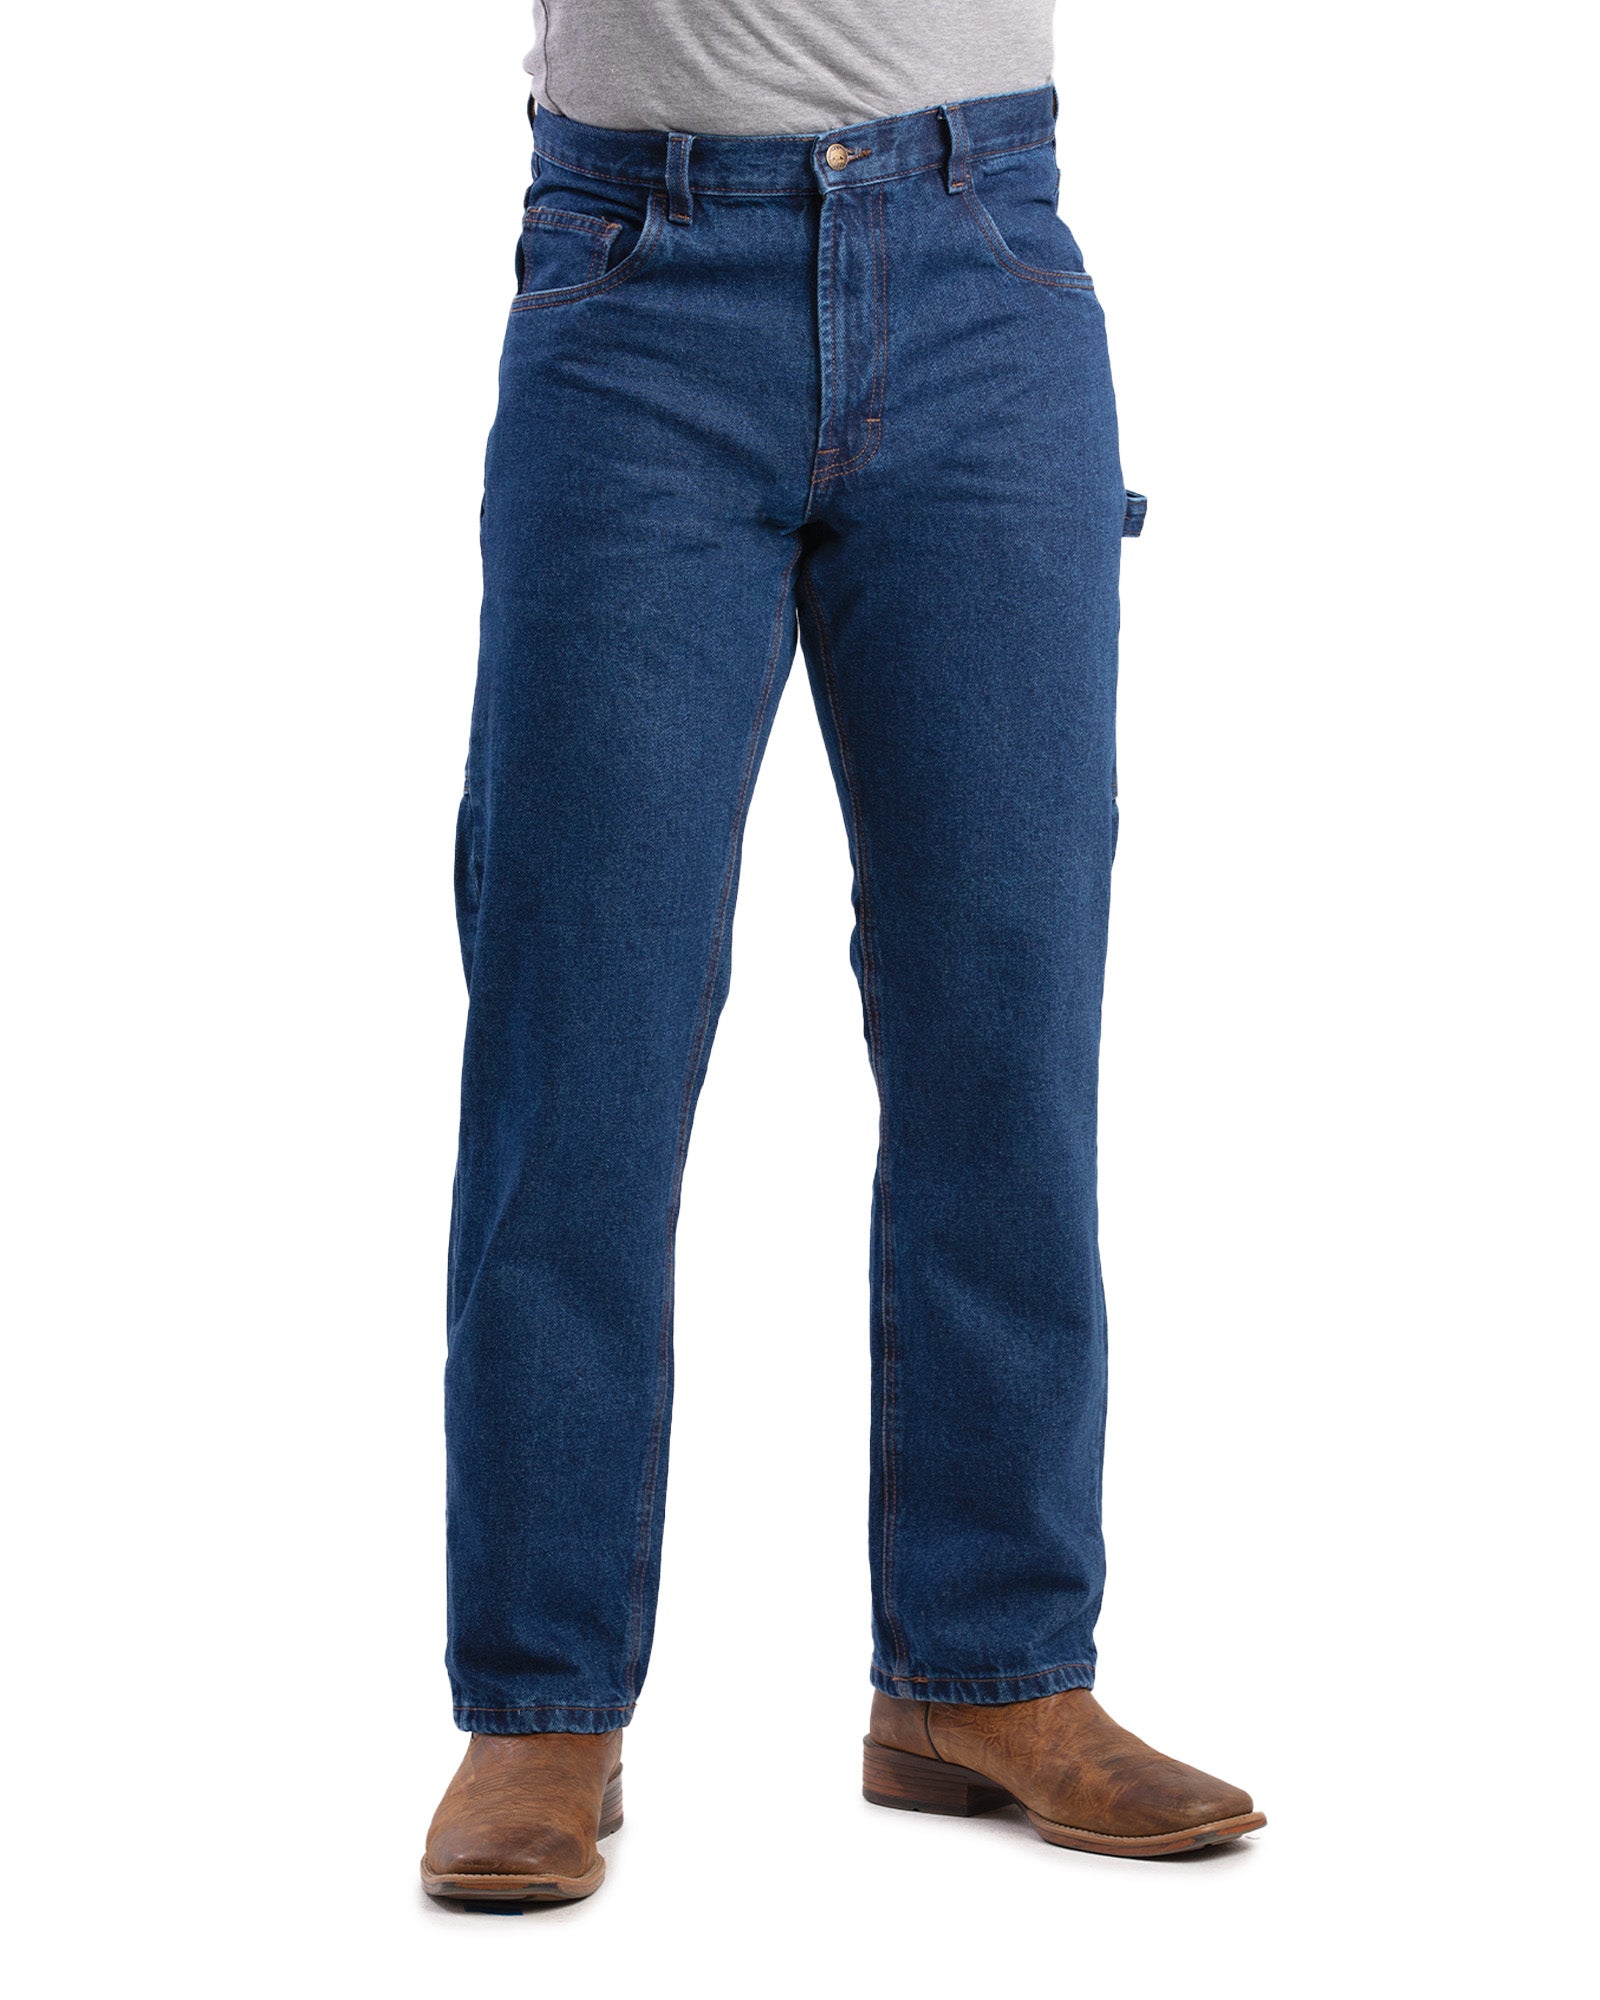 Relaxed Fit Carpenter Jeans, Mens Jeans